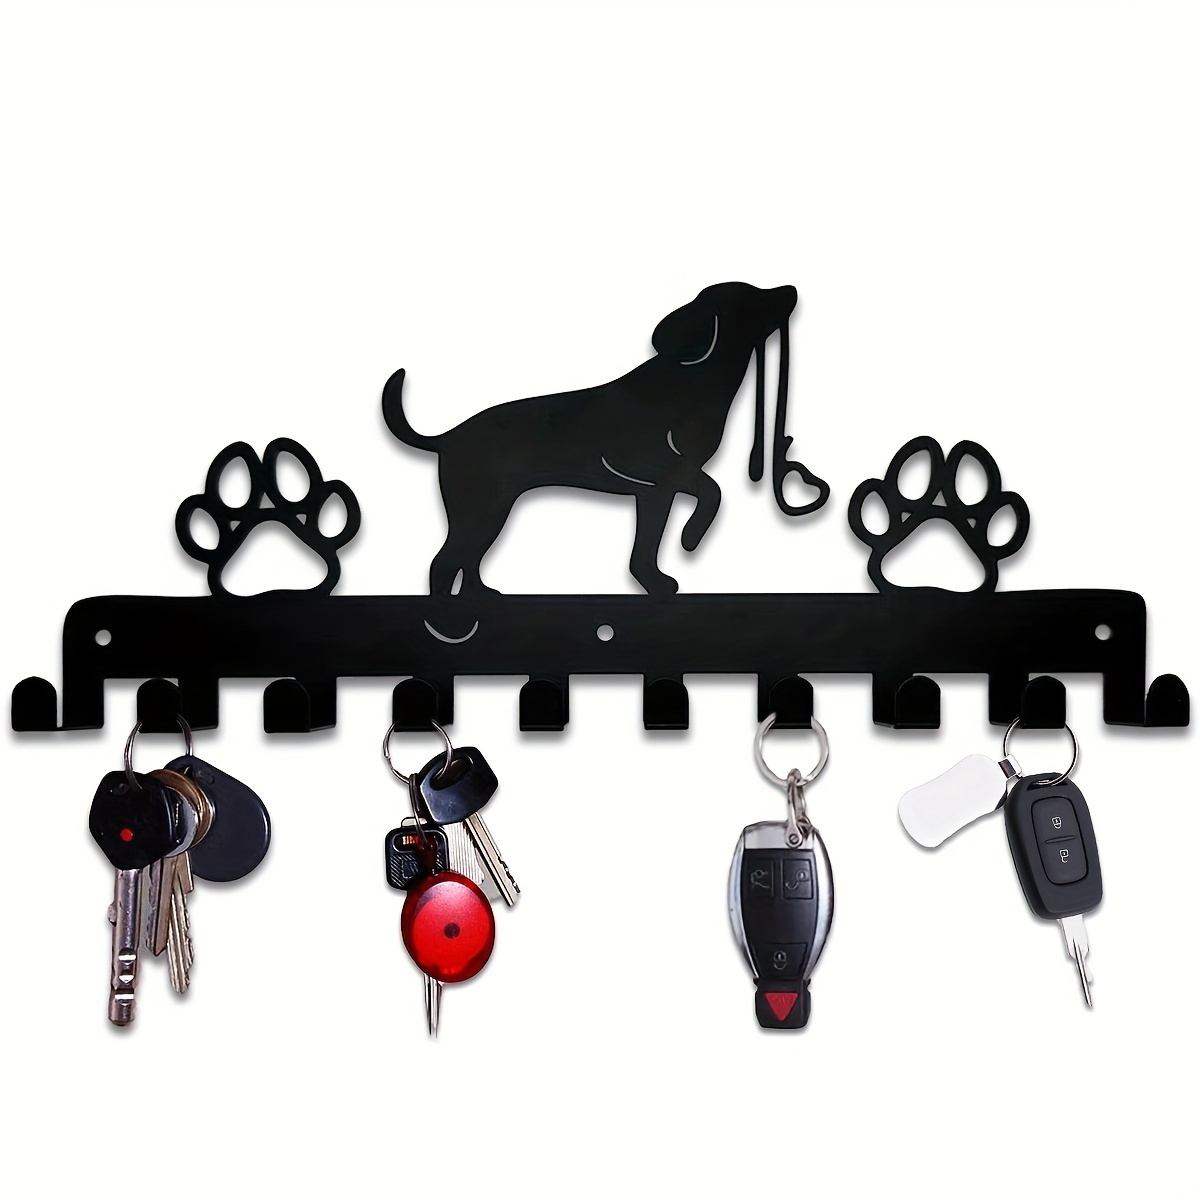 

1pc Dog And Paw Prints Metal Key Holder, 10 Hooks Black Iron Wall Mounted Hooks, Decorative Hook Organizer Rack For Bag Clothes Key, Wall Decoration, Gift For Dog Lover